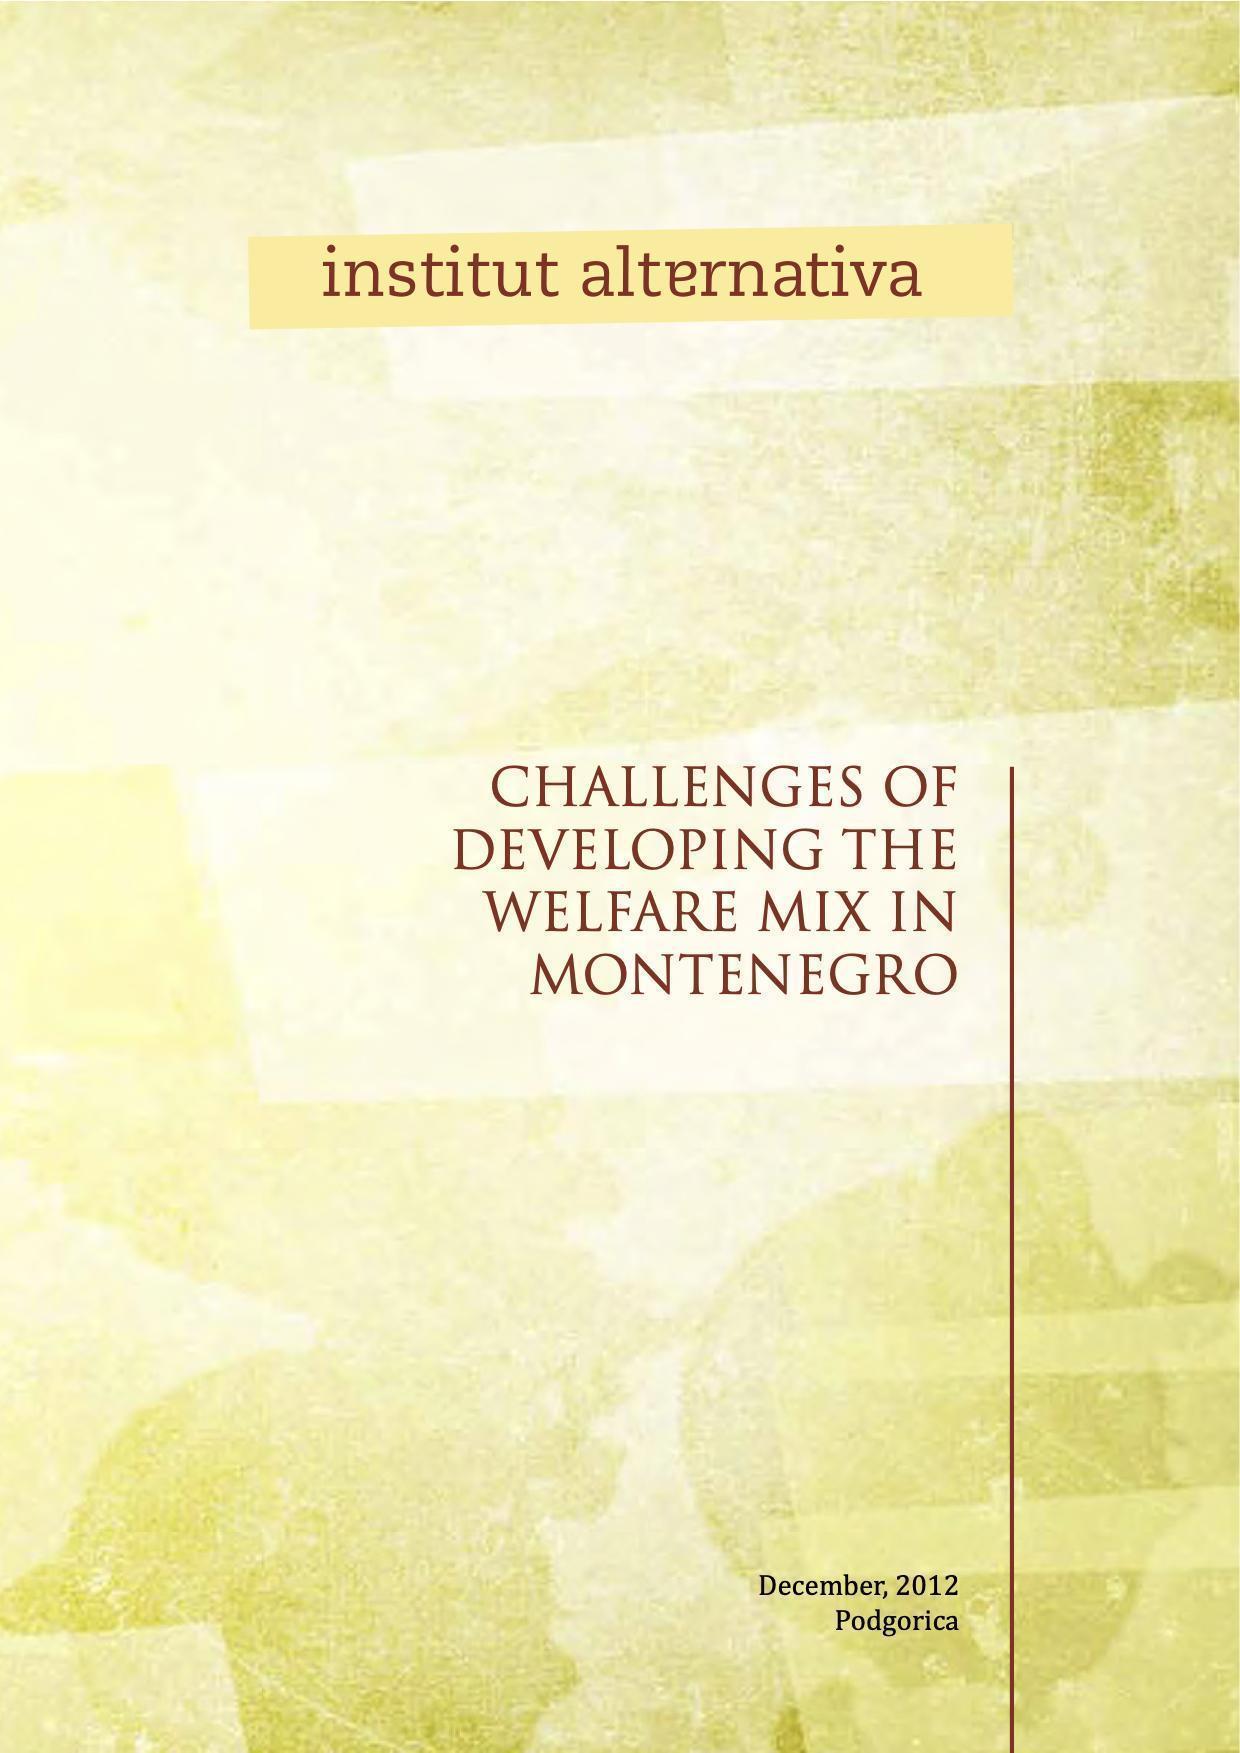 Challenges of developing the welfare mix in Montenegro